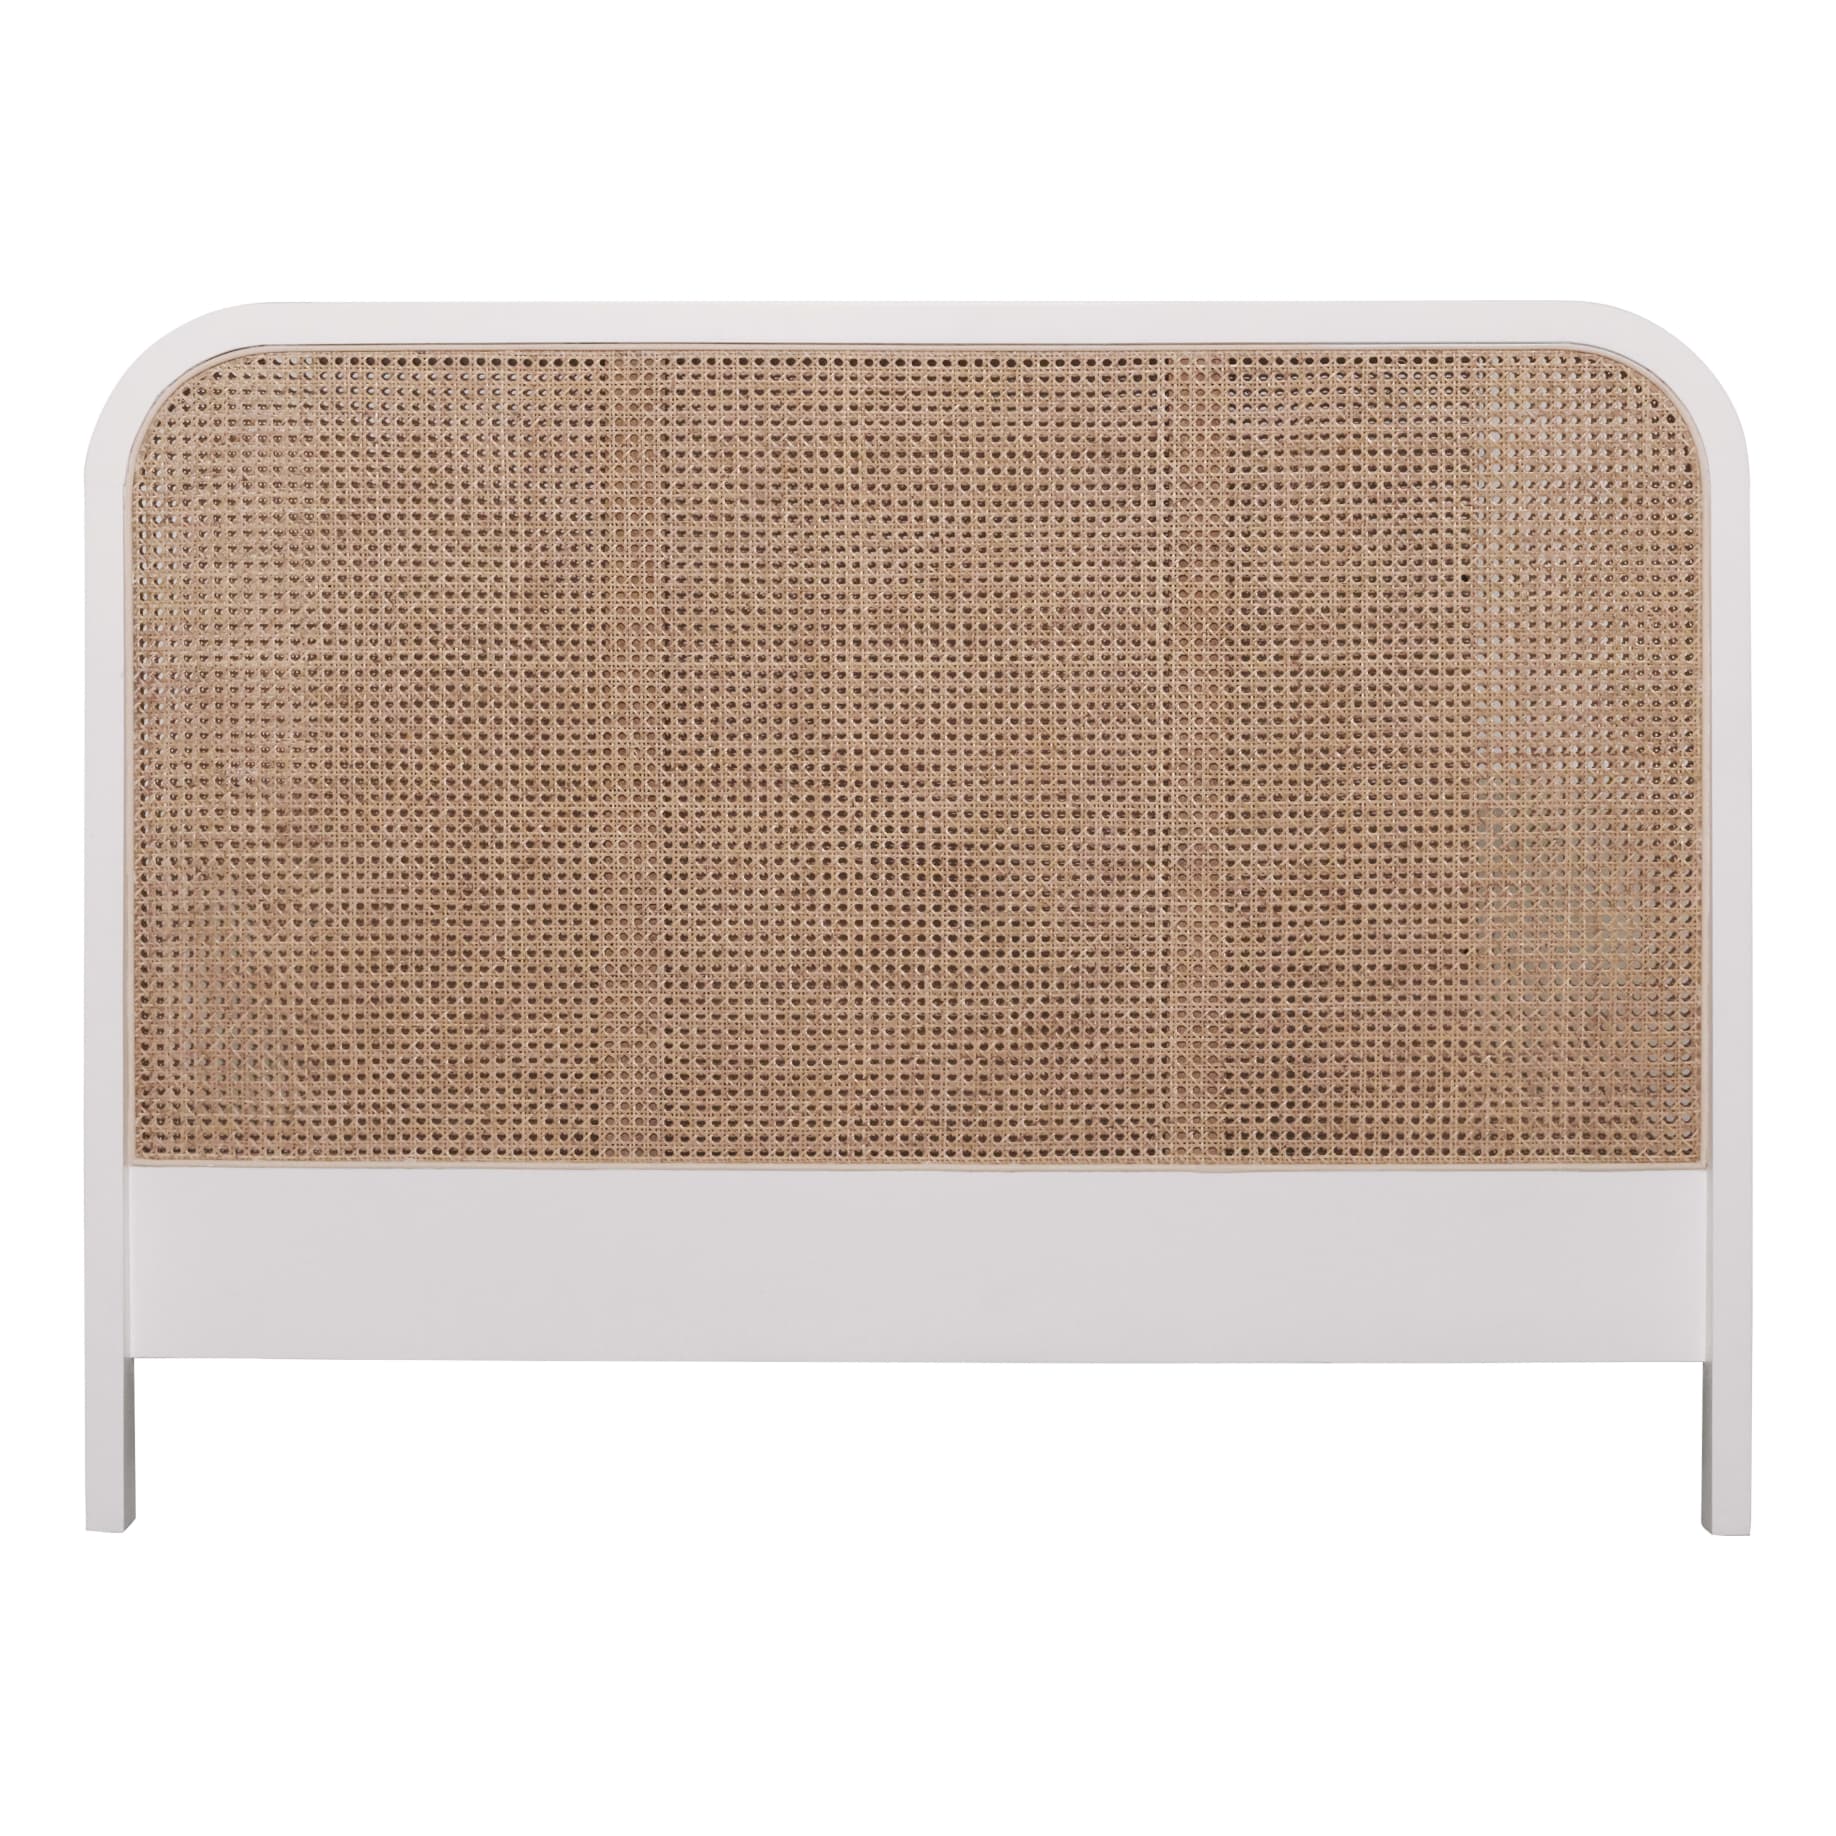 Willow Queen Bedhead in Mangowood White / Rattan